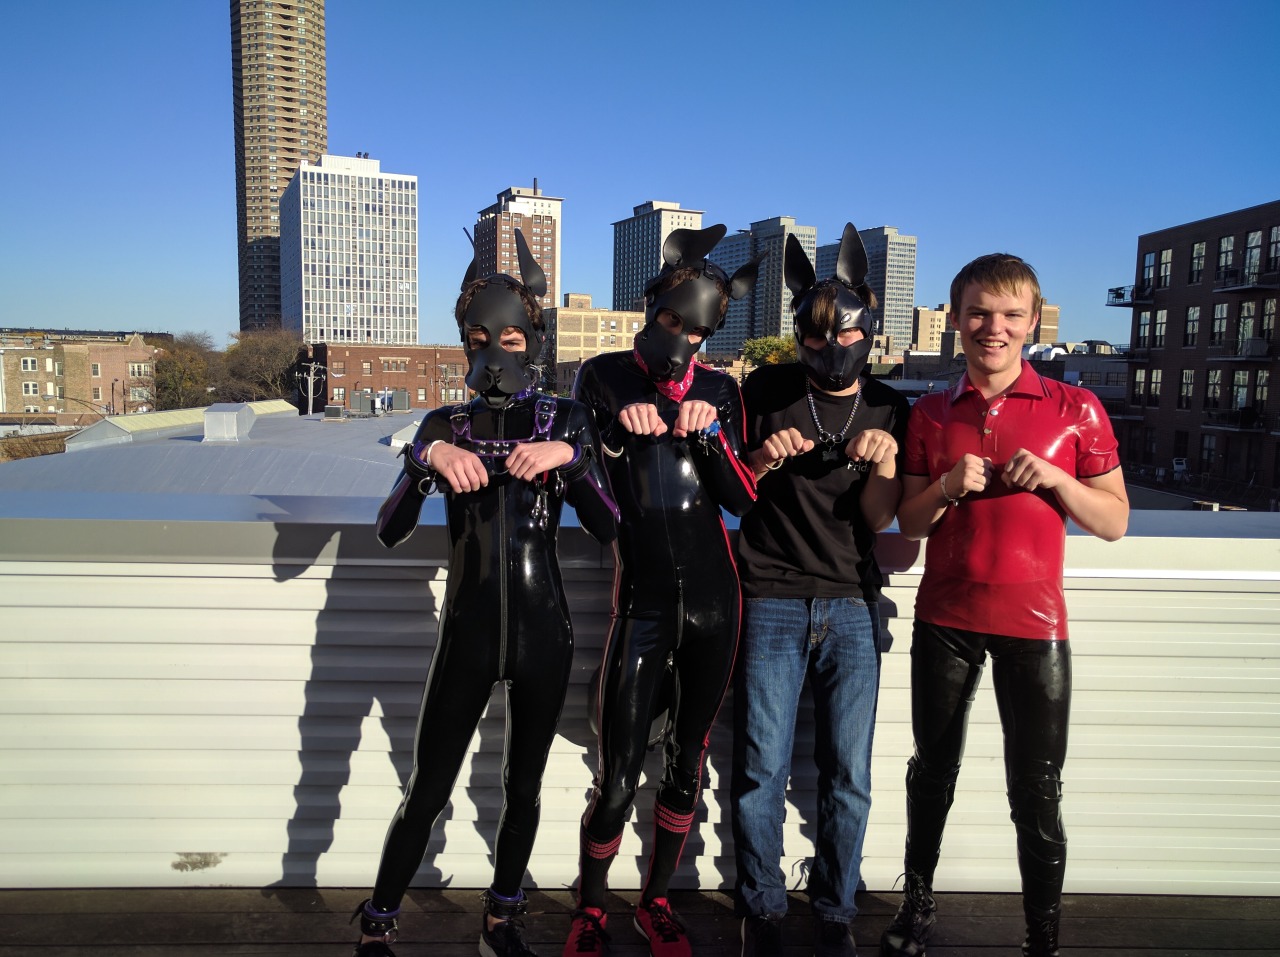 Me (out of rubber) at MIR this past weekend with @puplux, @robofux and @alexinrubber!